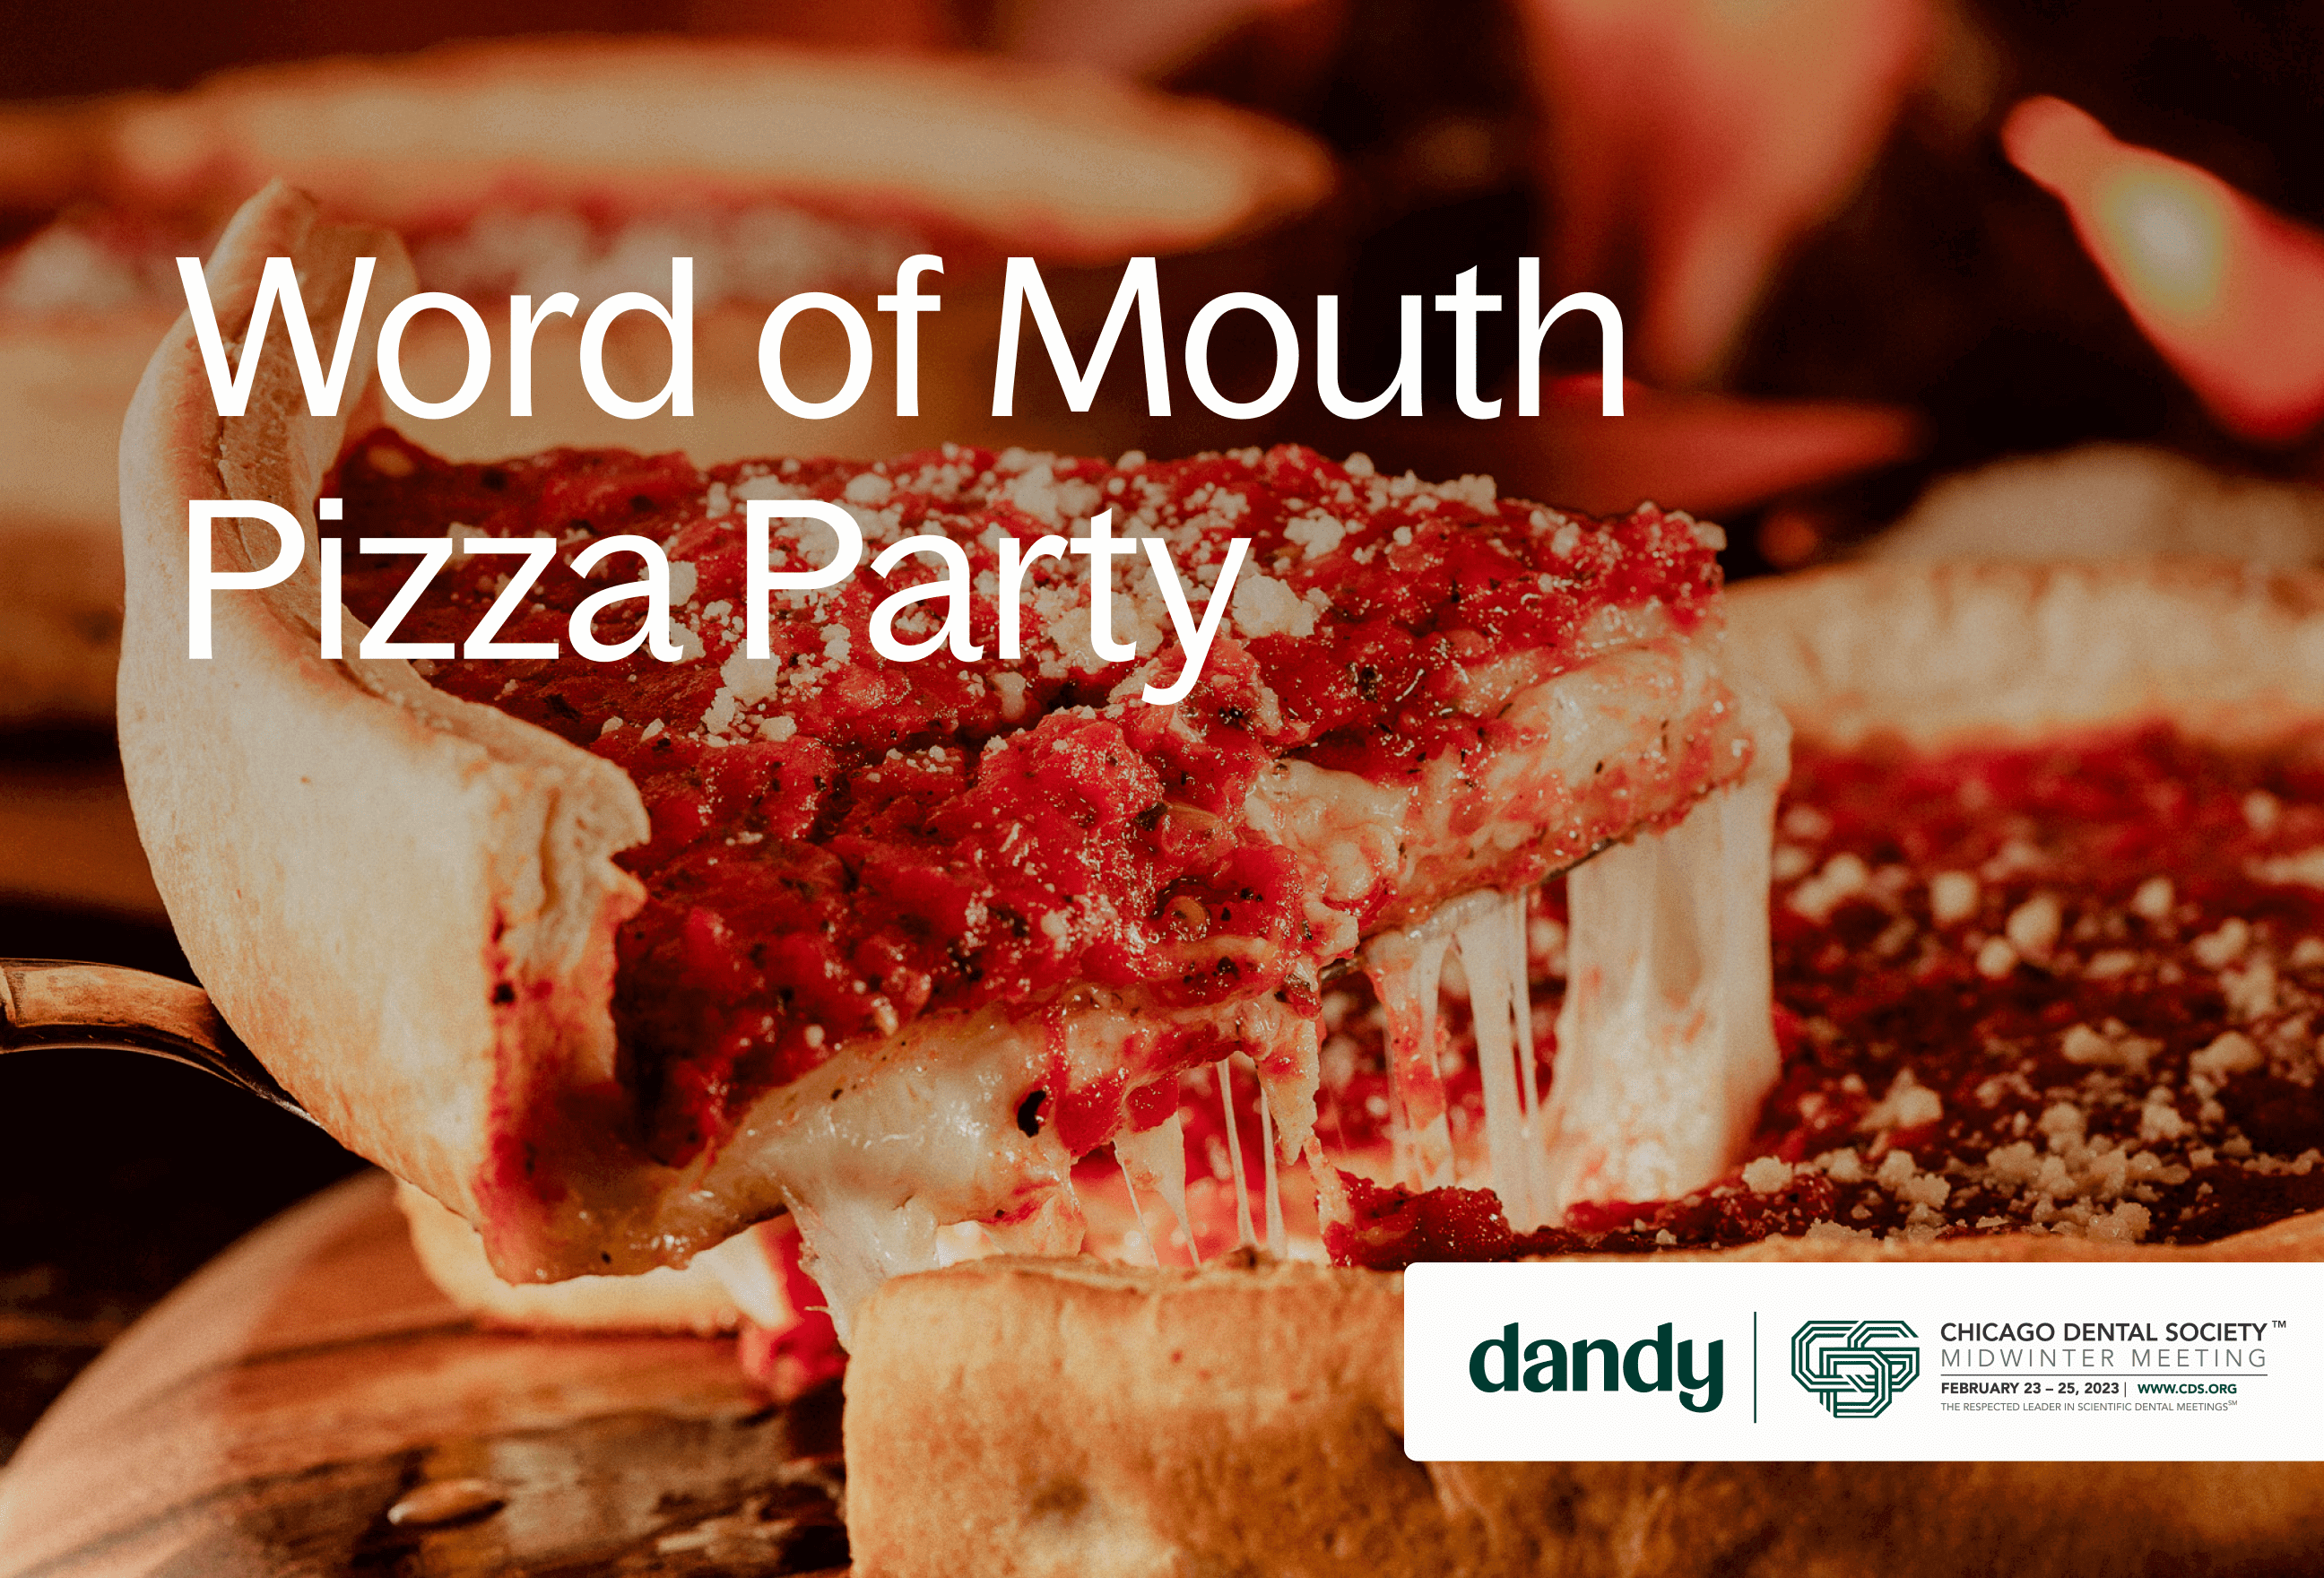 word of mouth pizza party at chicago midwinter dental meeting